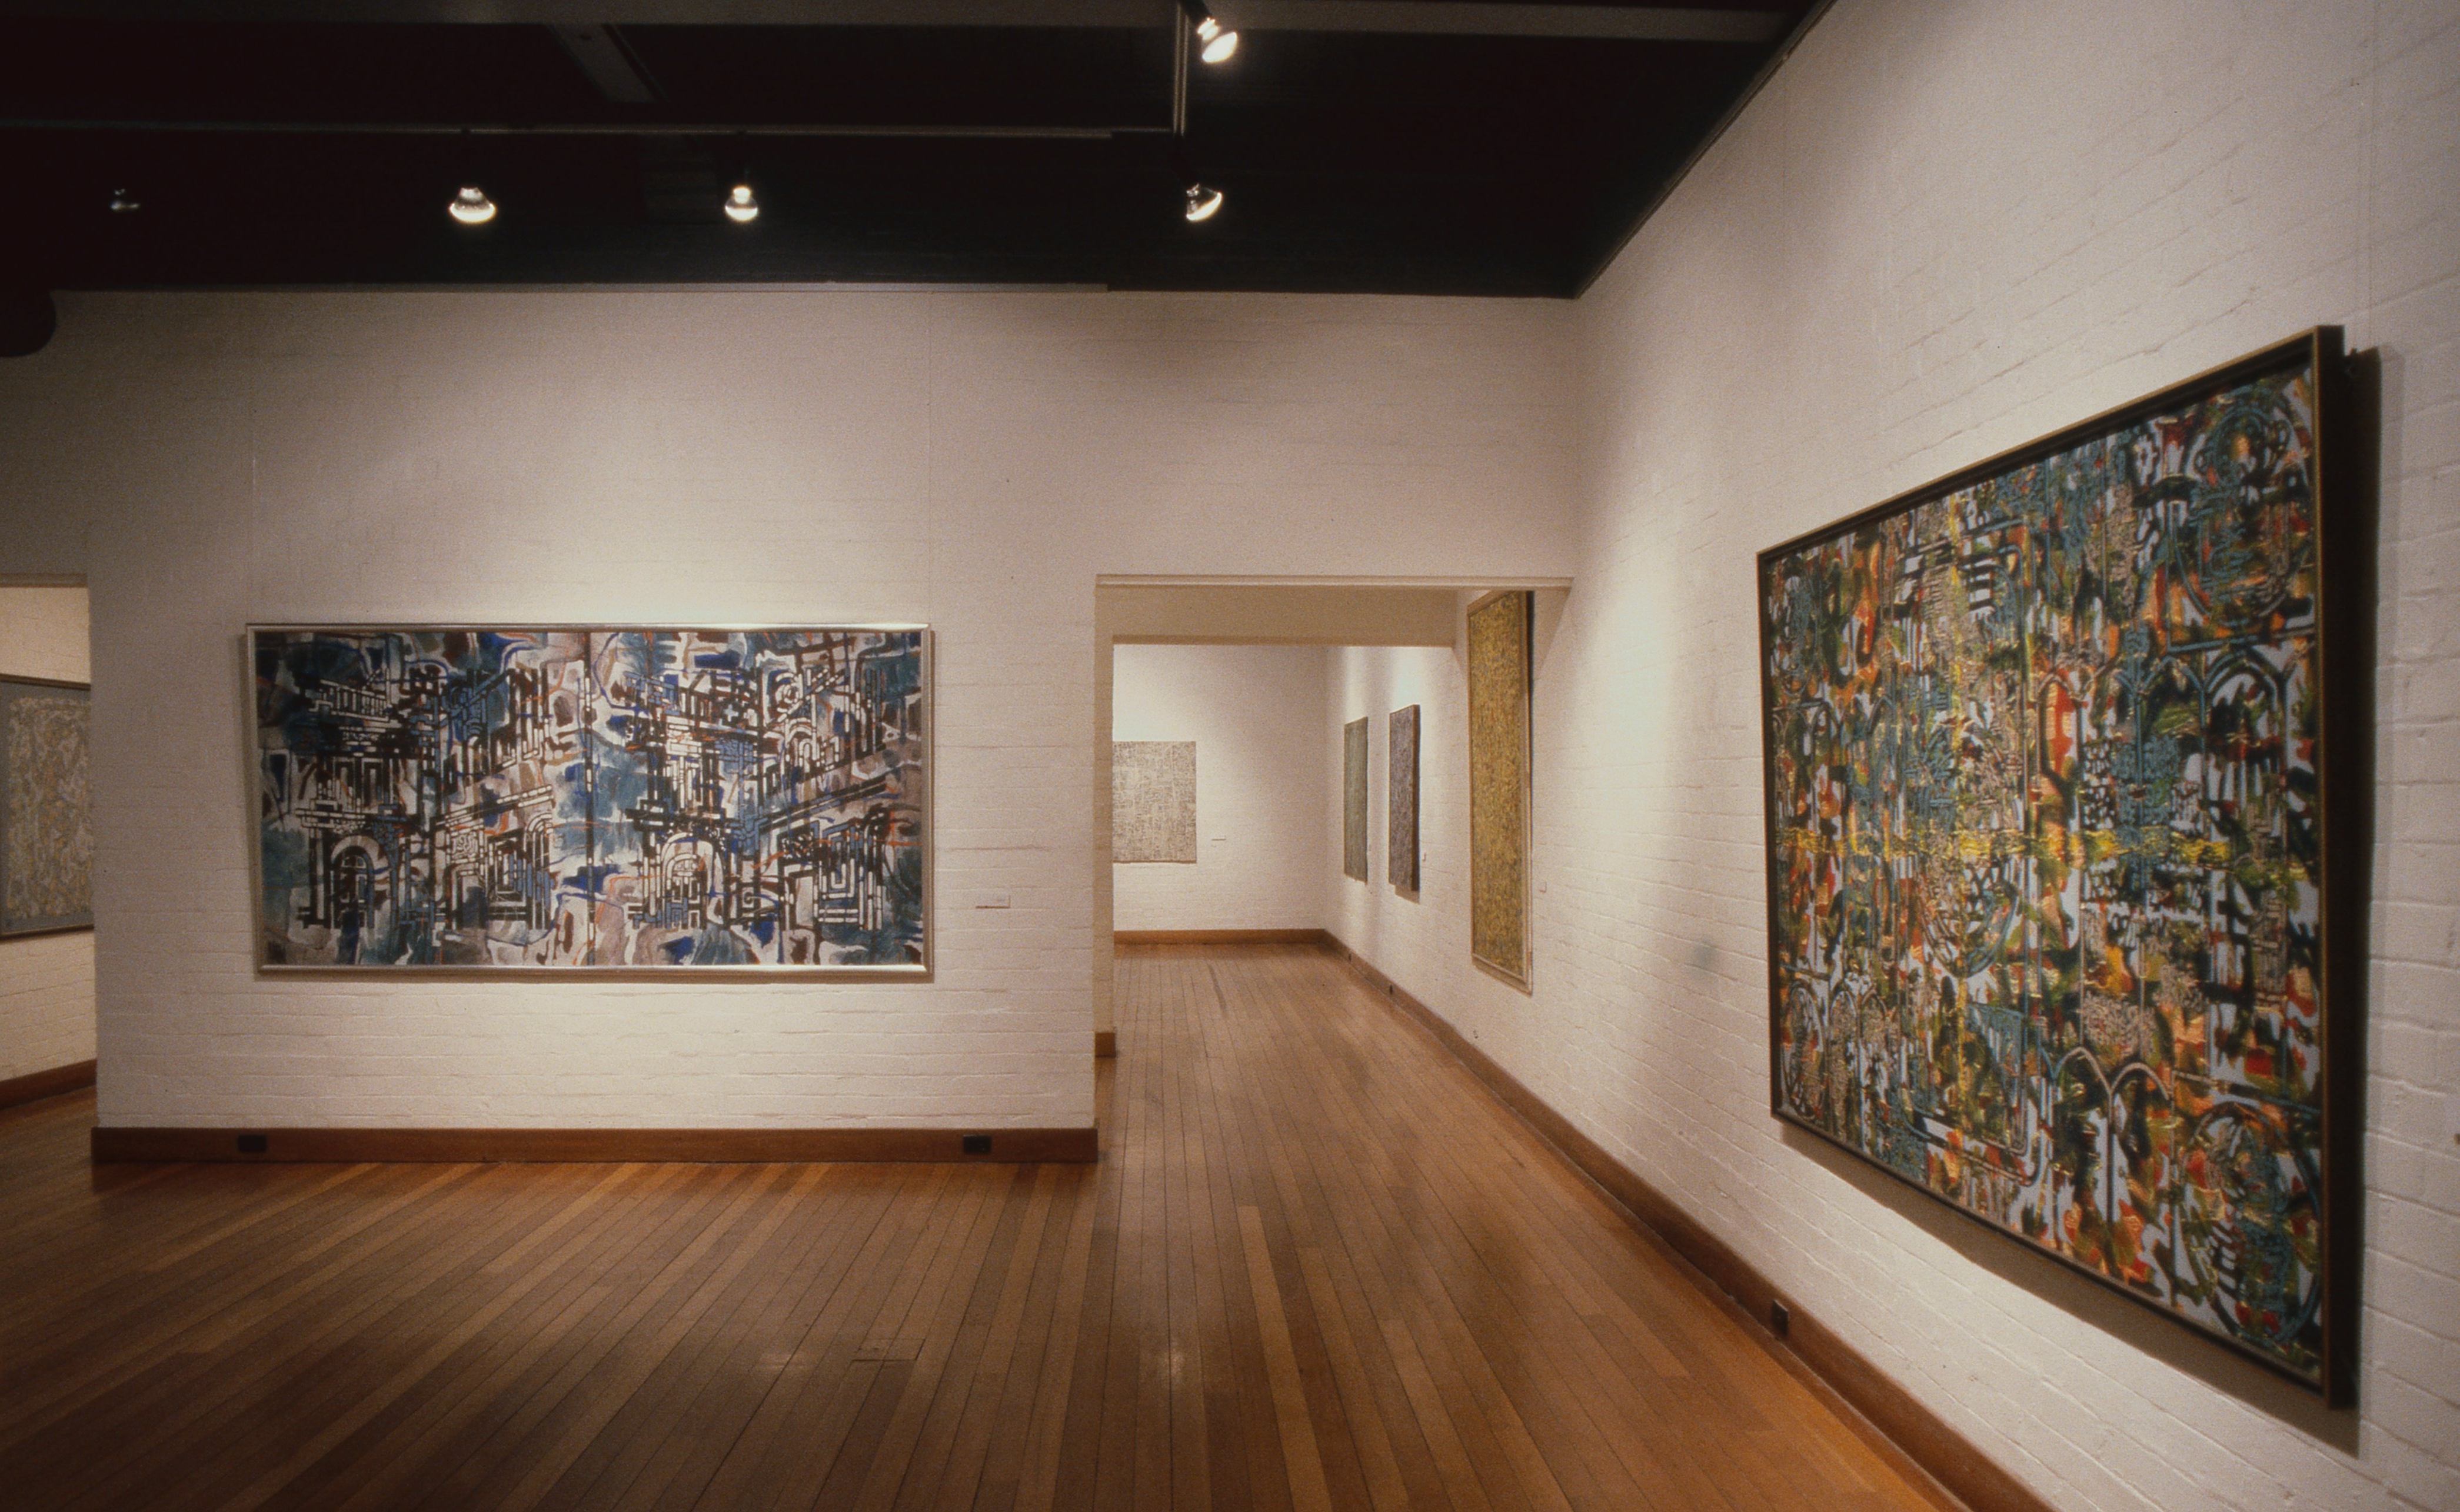 idg_archive_1994_points_of_view_rod_milgate_paintings_001_install.jpg